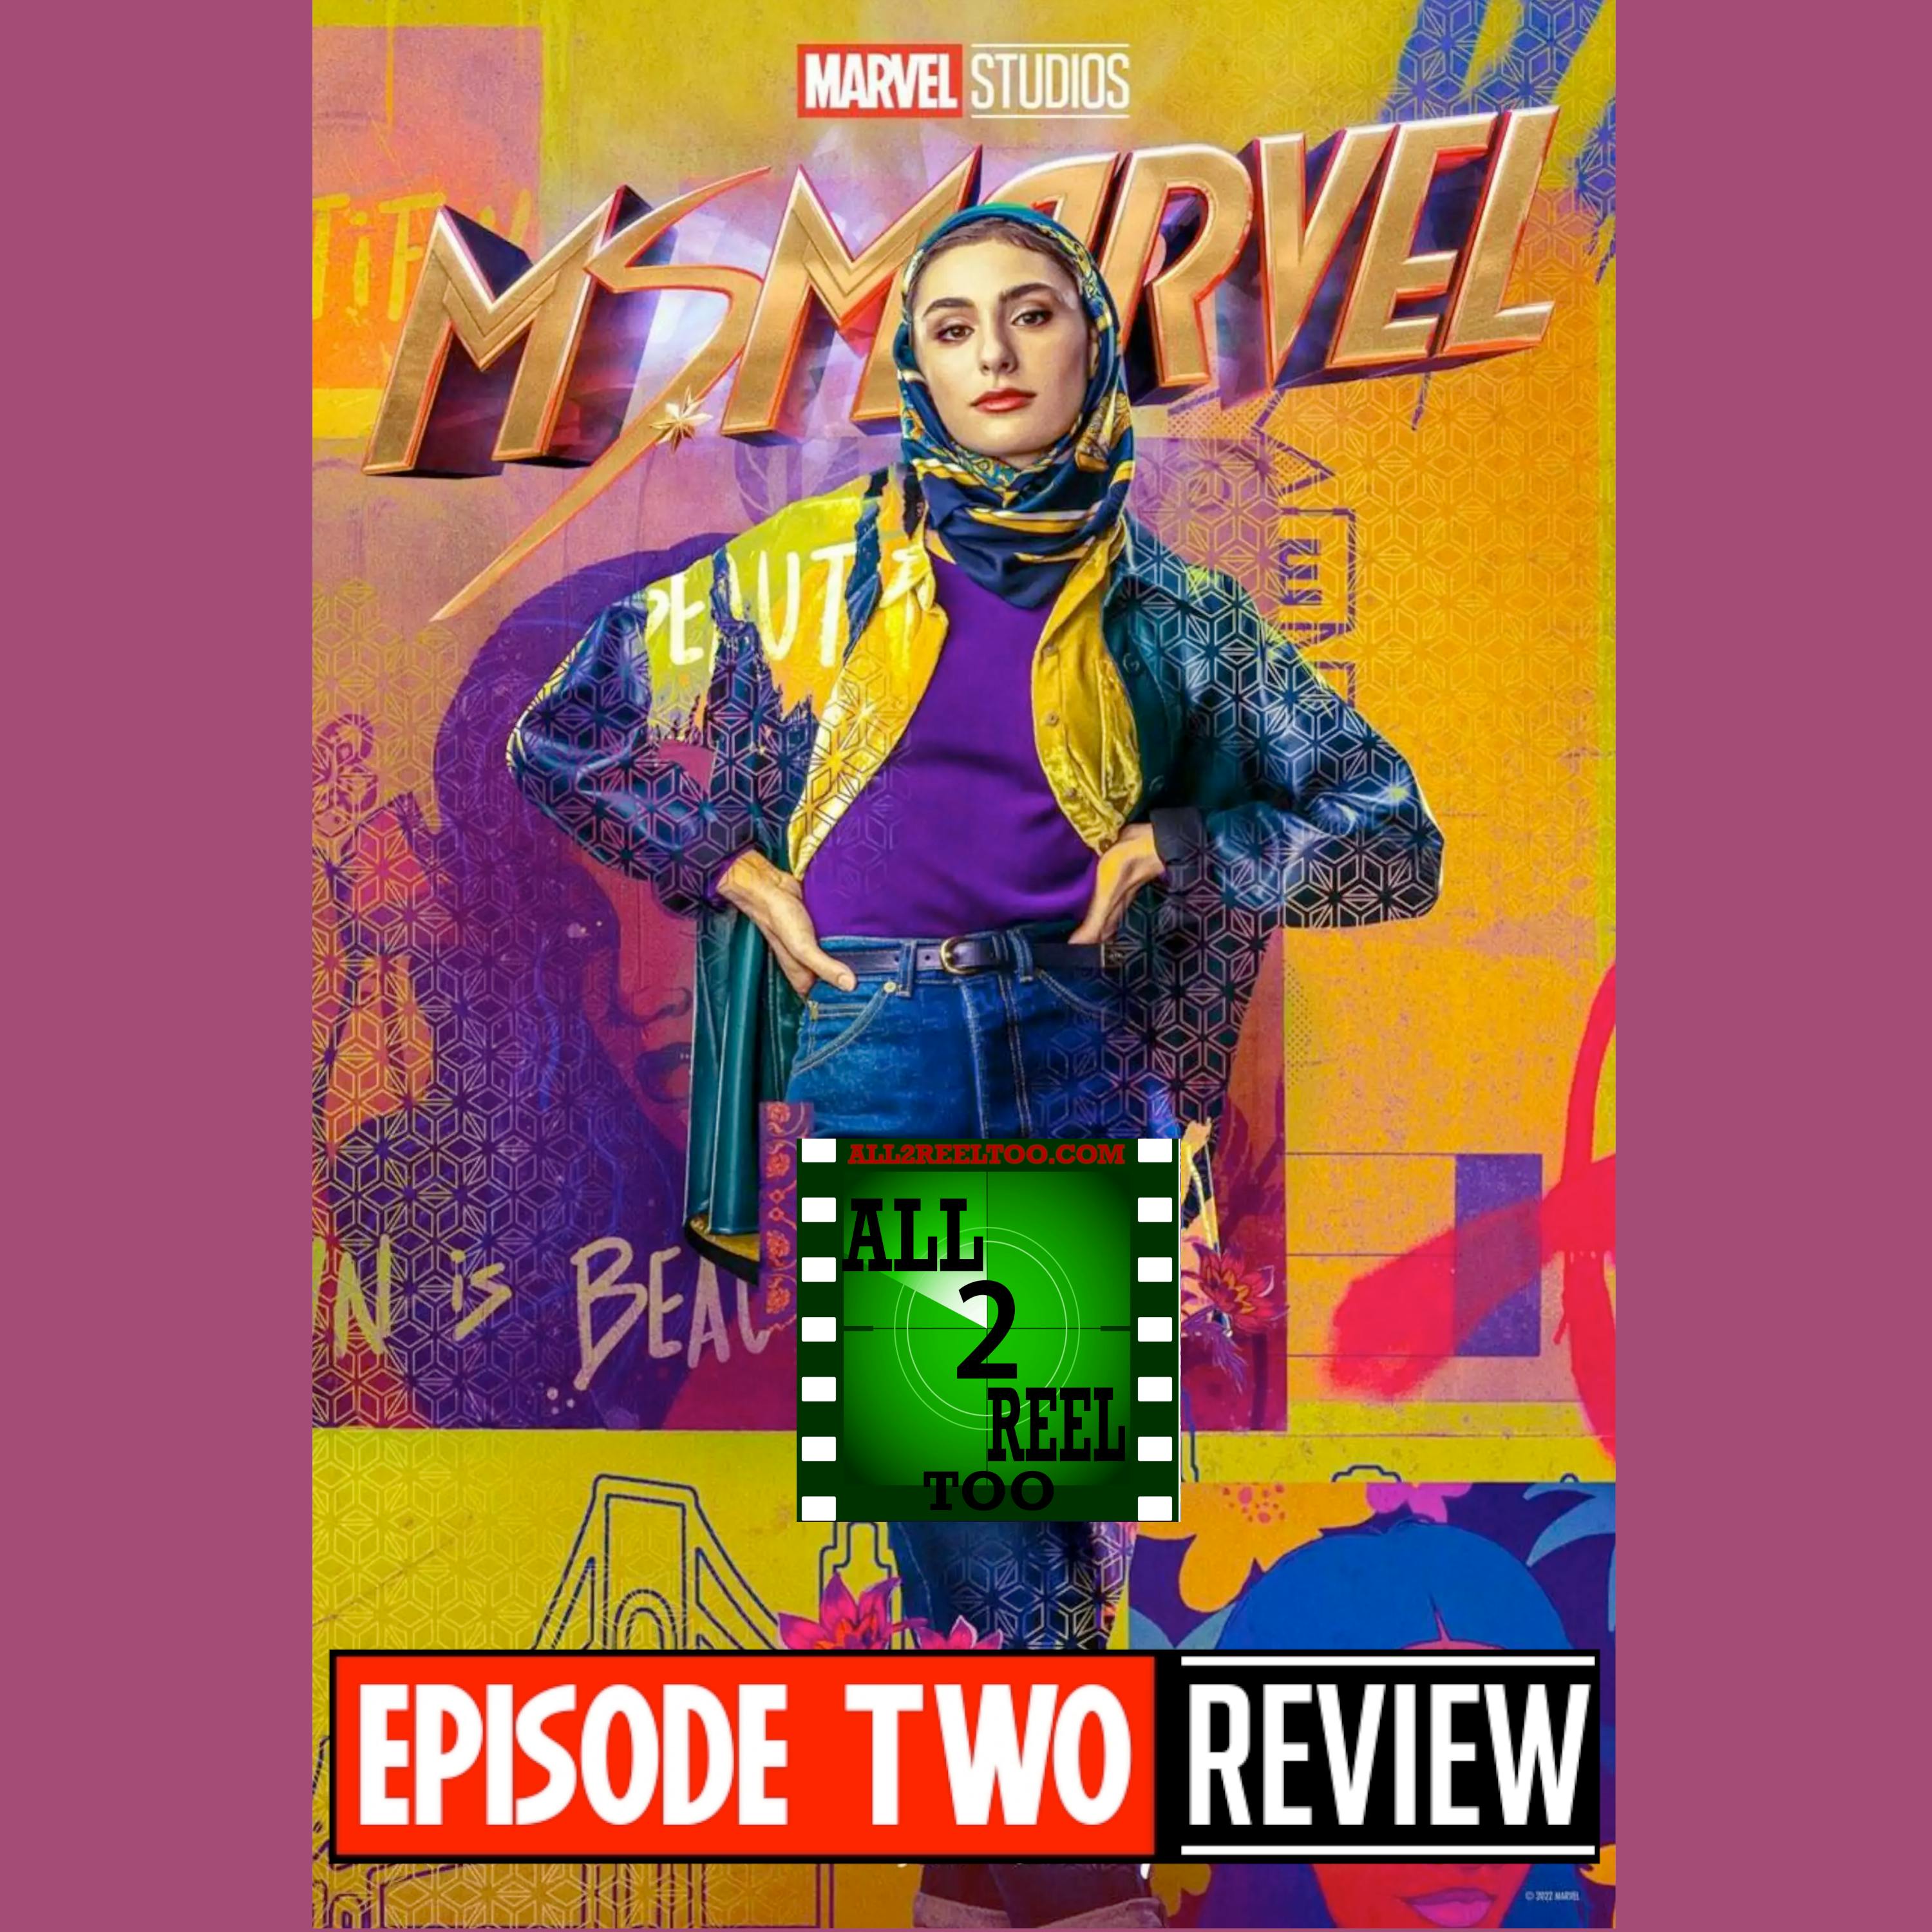 Ms. Marvel EPISODE 2 REVIEW